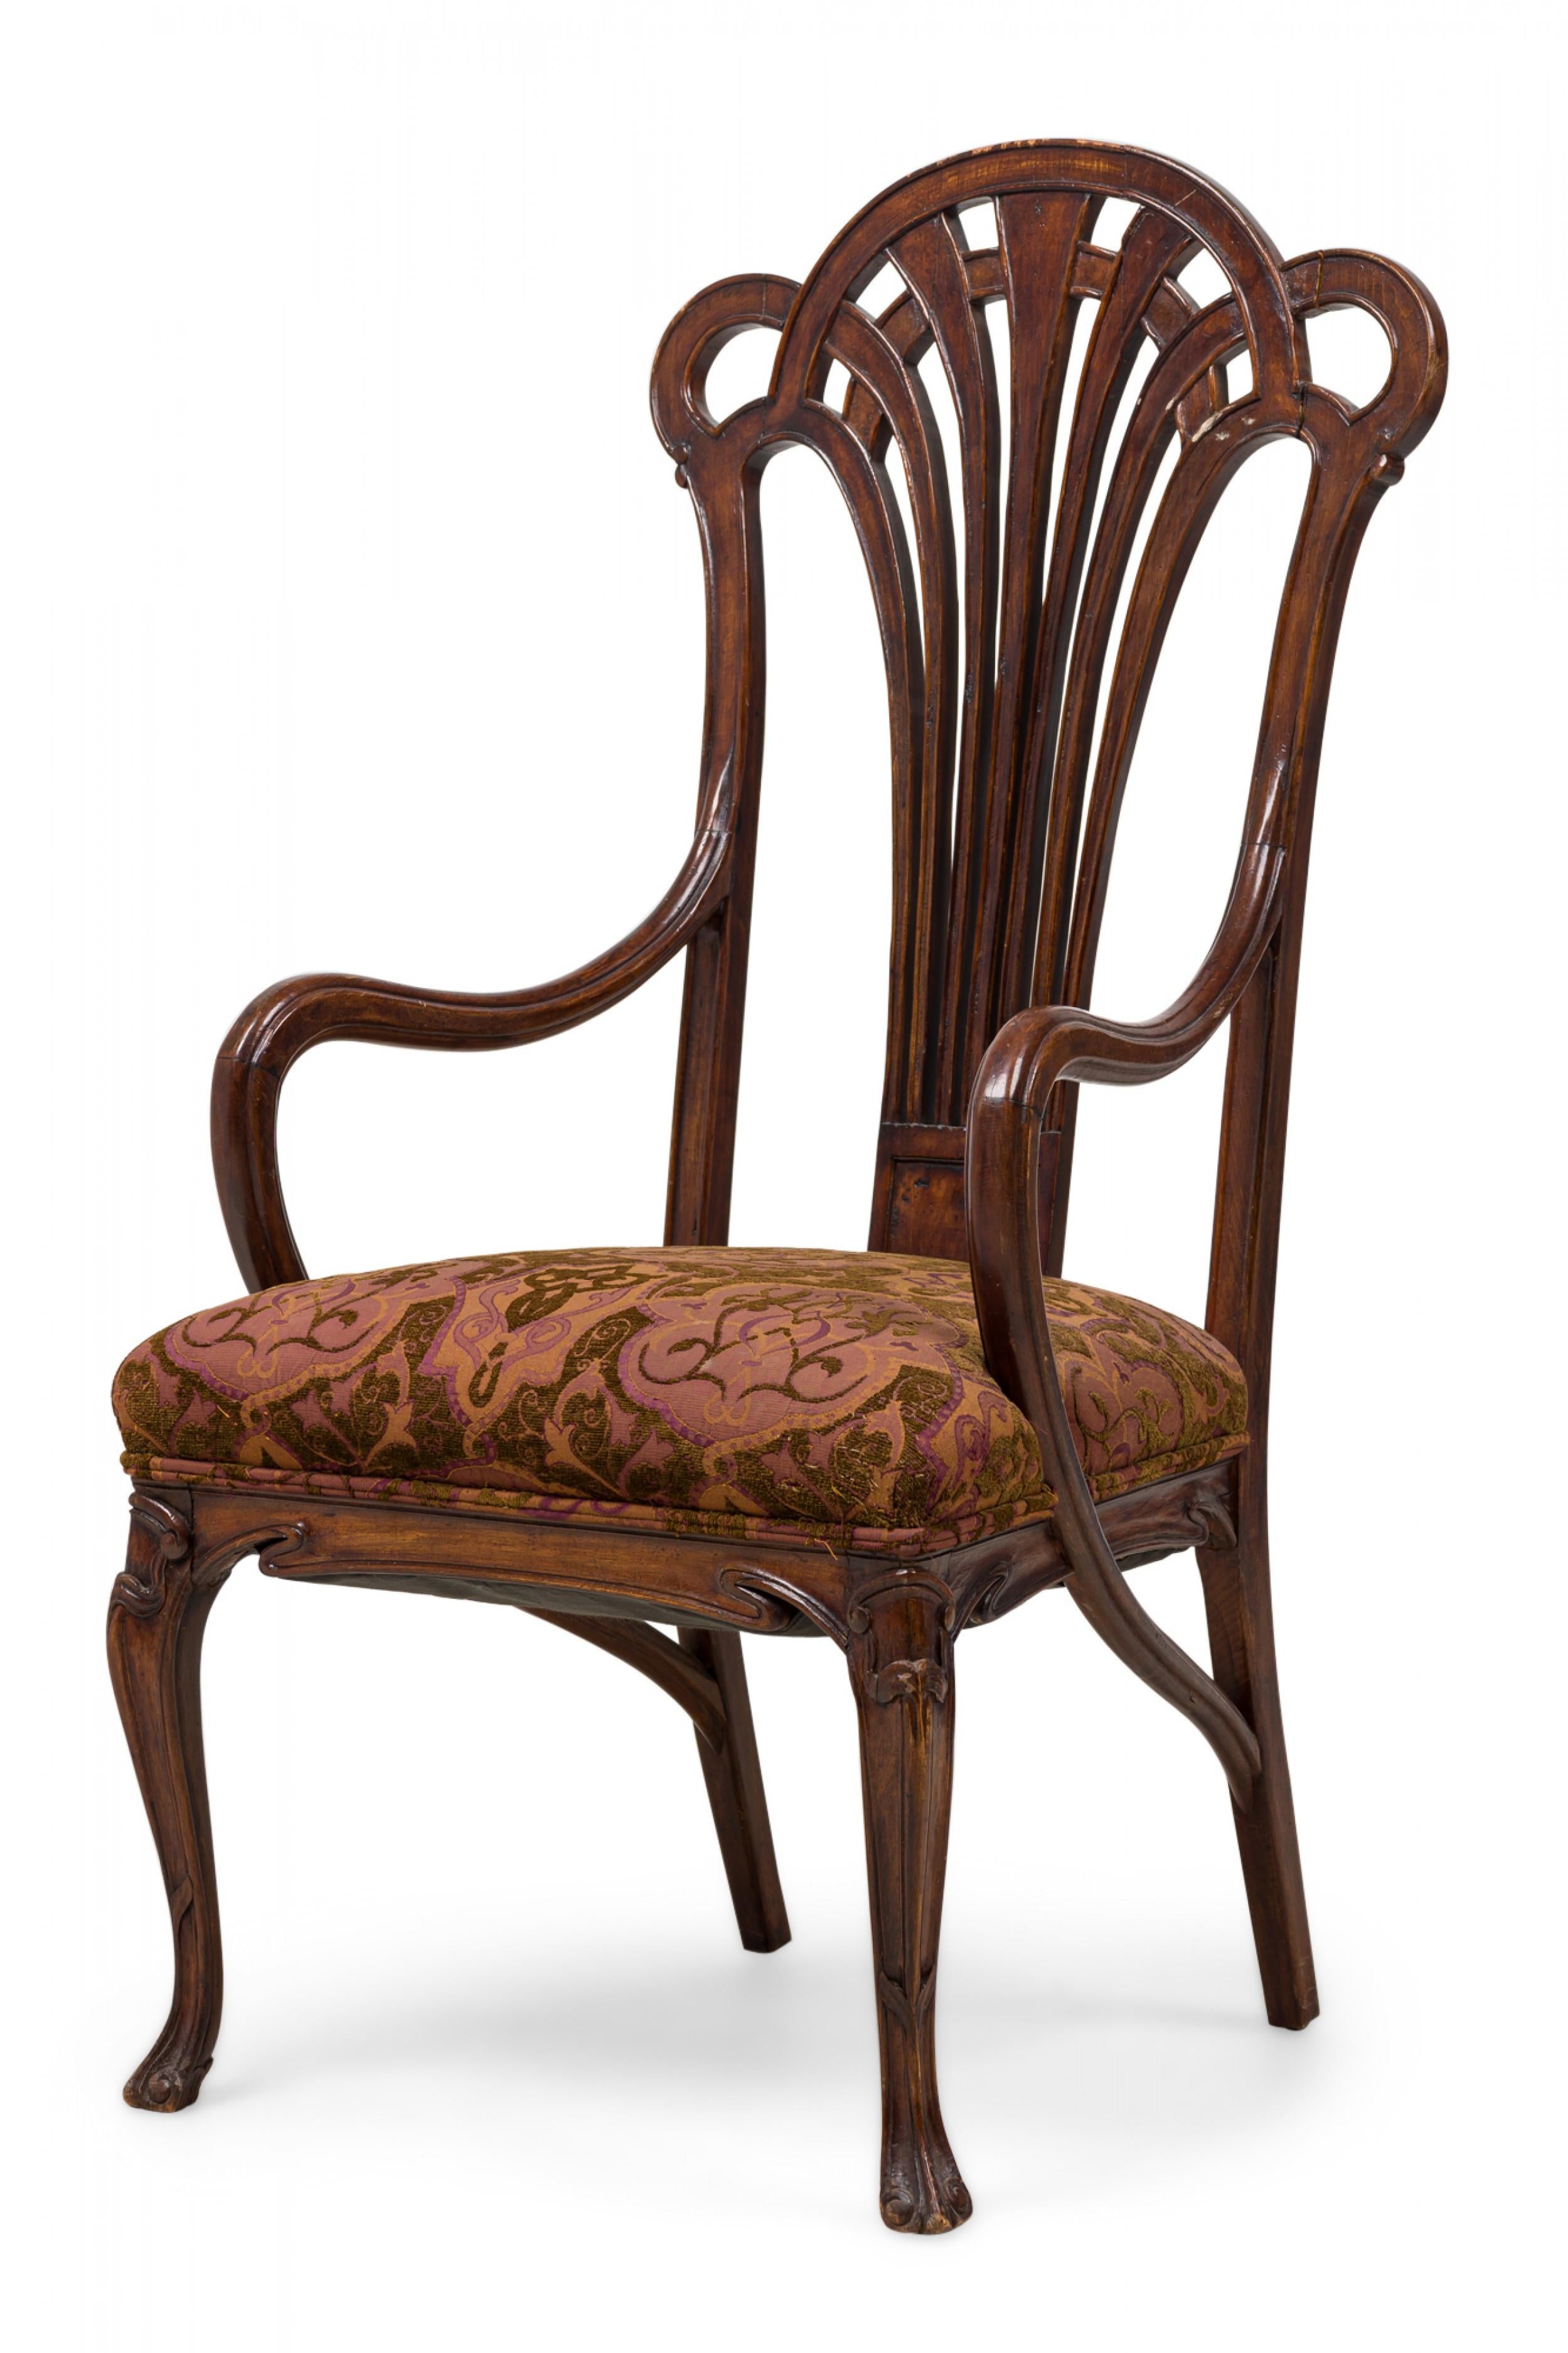 Art Nouveau French mahogany armchair with a pierced fan form connected to curved sculptural arms, the seat upholstered in a textured earth tone and mauve scroll & foliate patterned fabric, with a fluidly carved decorative frieze and front cabriole